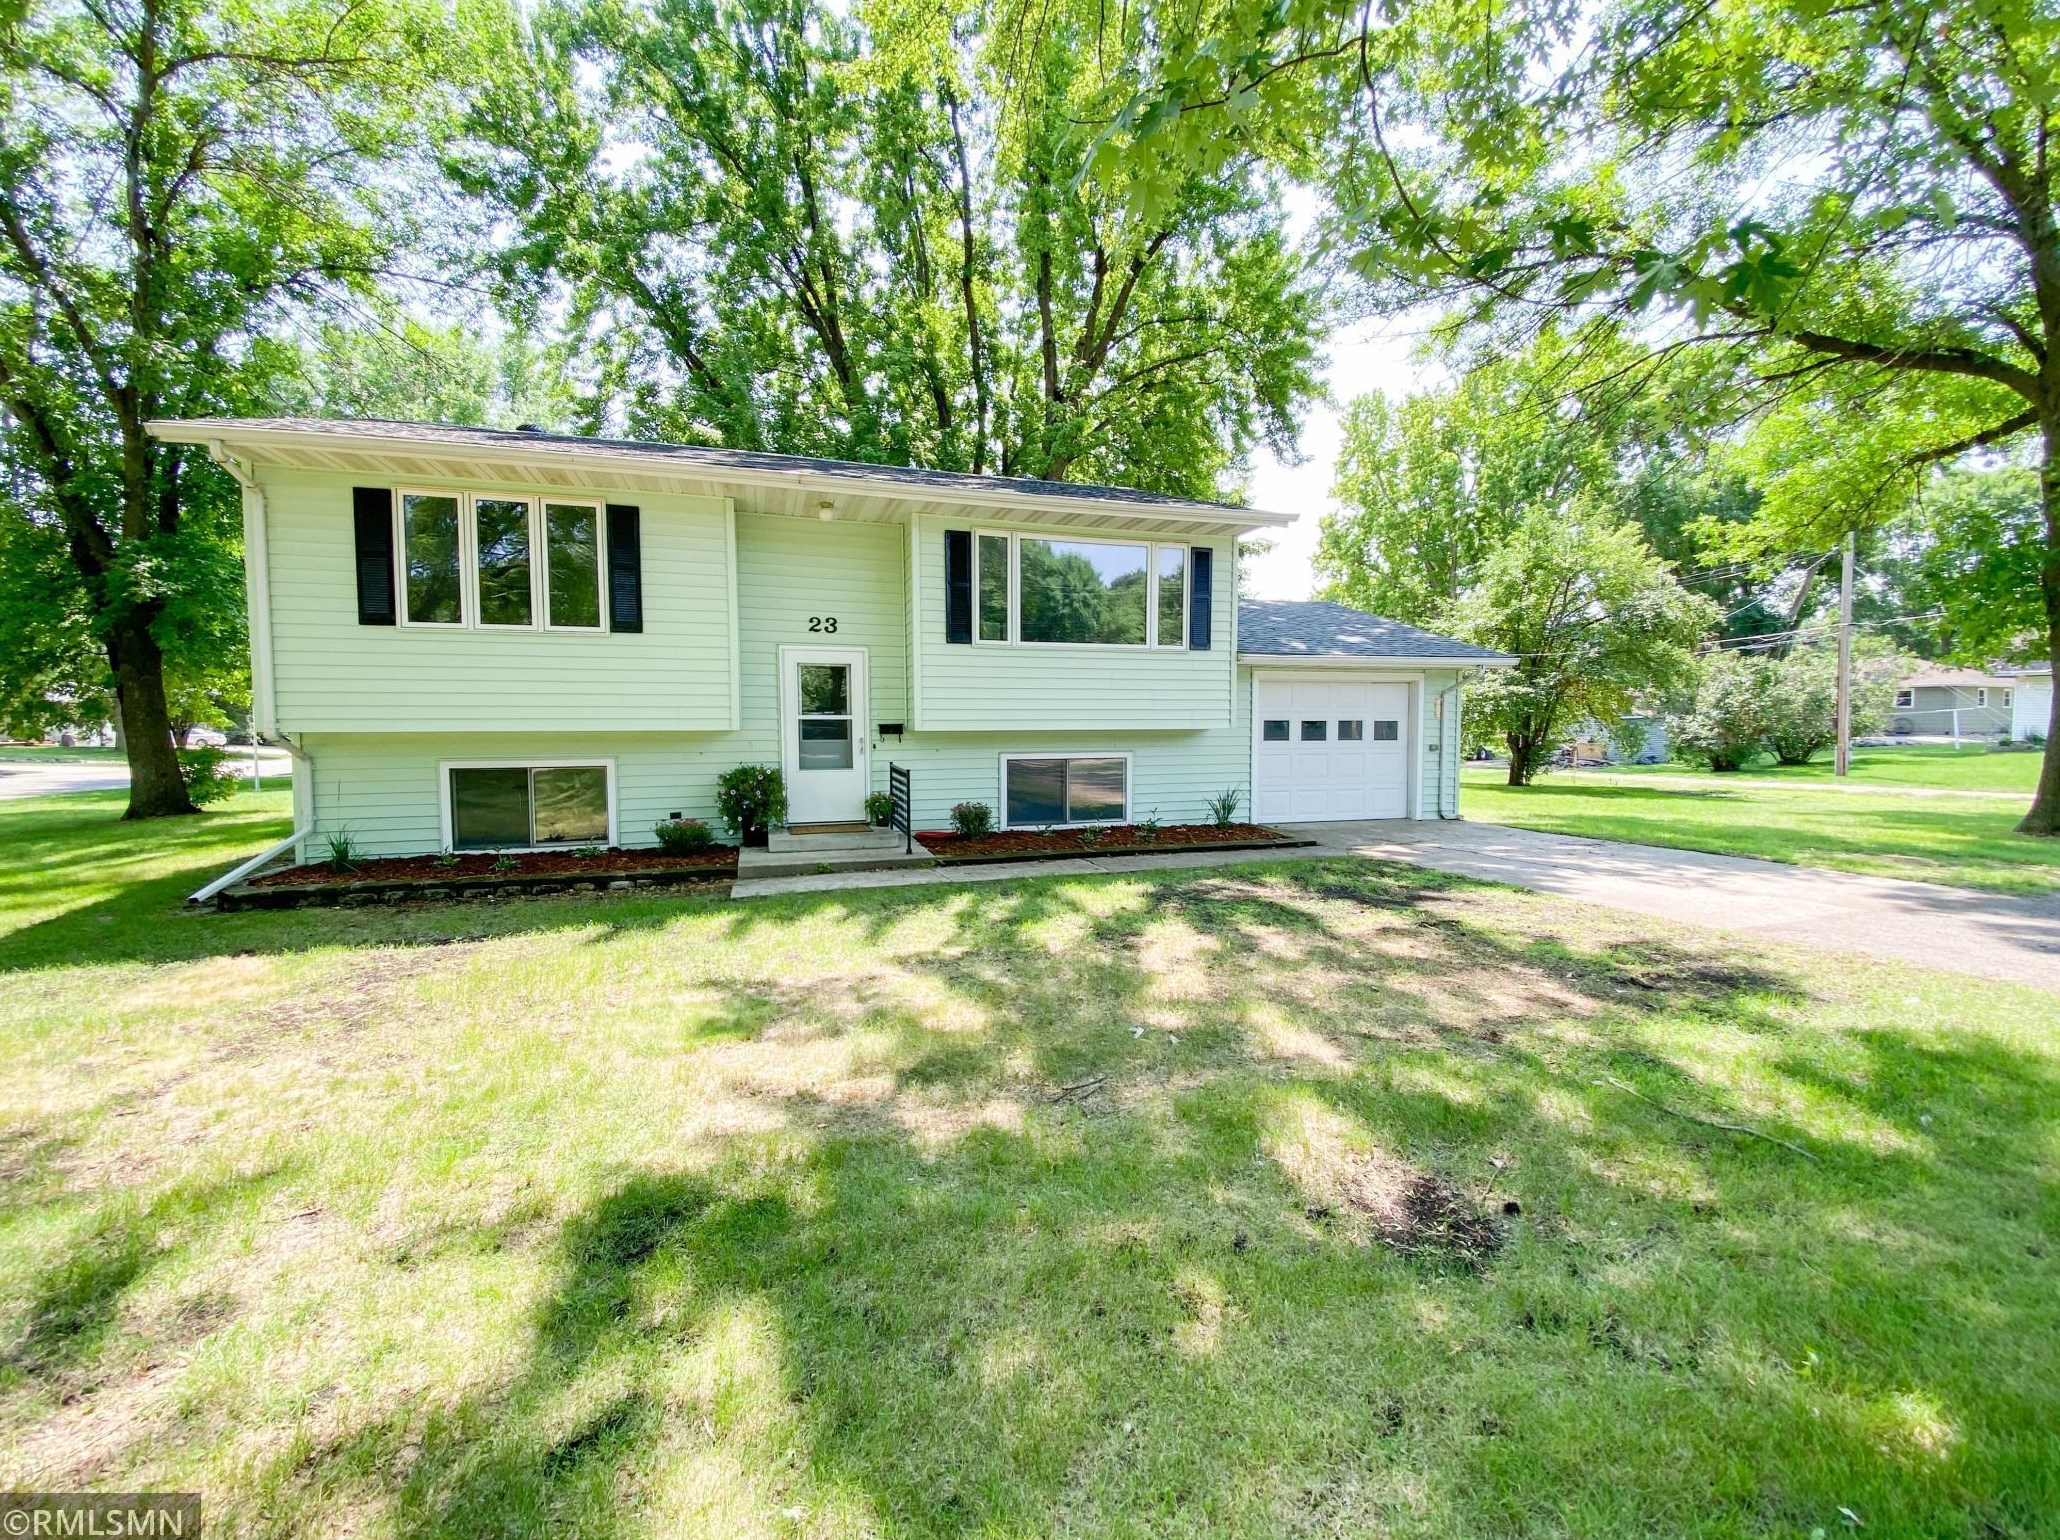 23 Lincoln Ave E, Gaylord, MN 55334